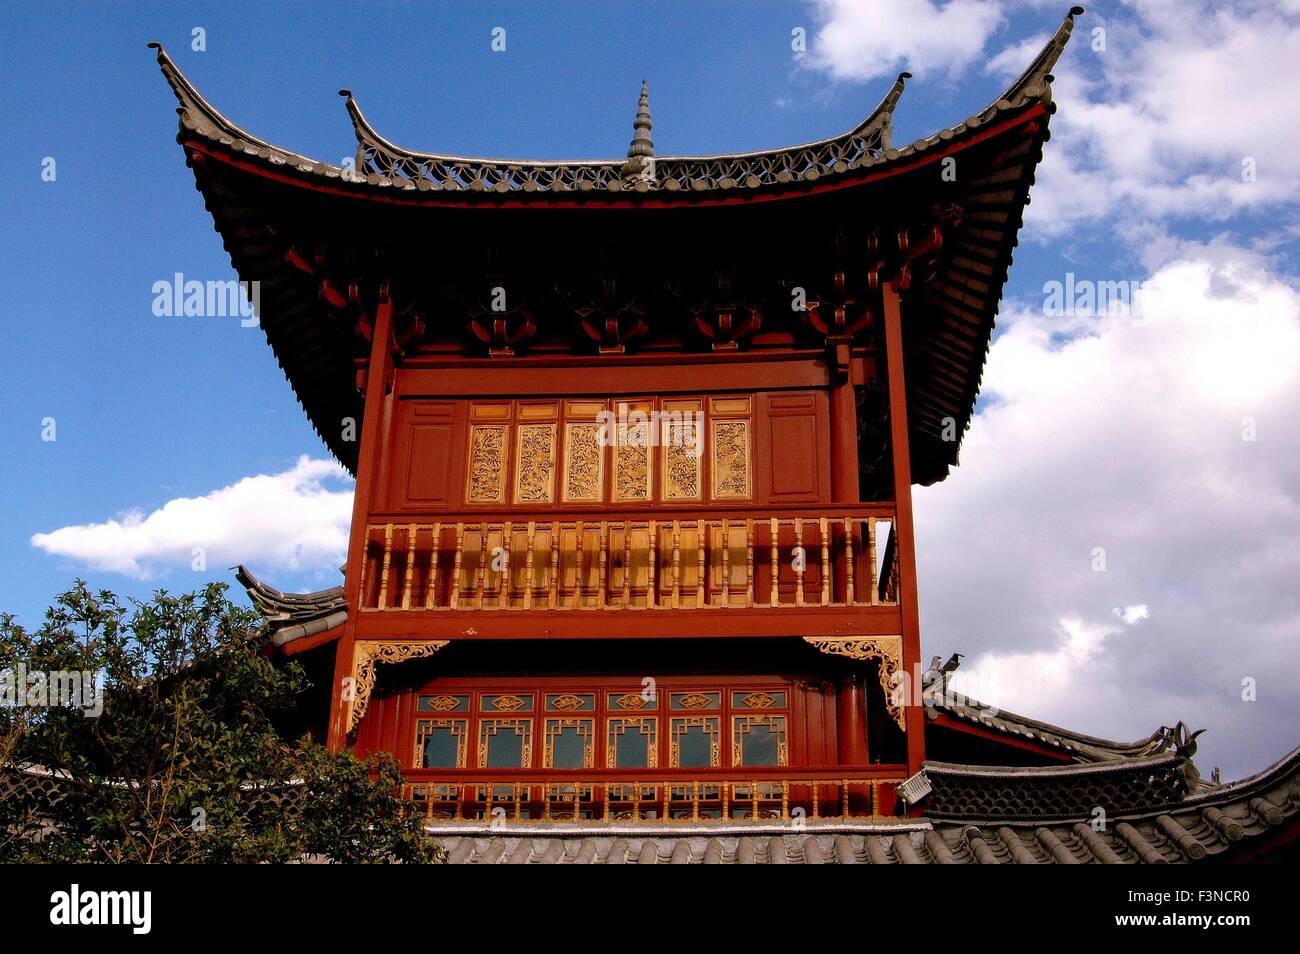 Lijiang, China:  Wooden tower house with upswept flying eave roofs on South Gate Square Stock Photo